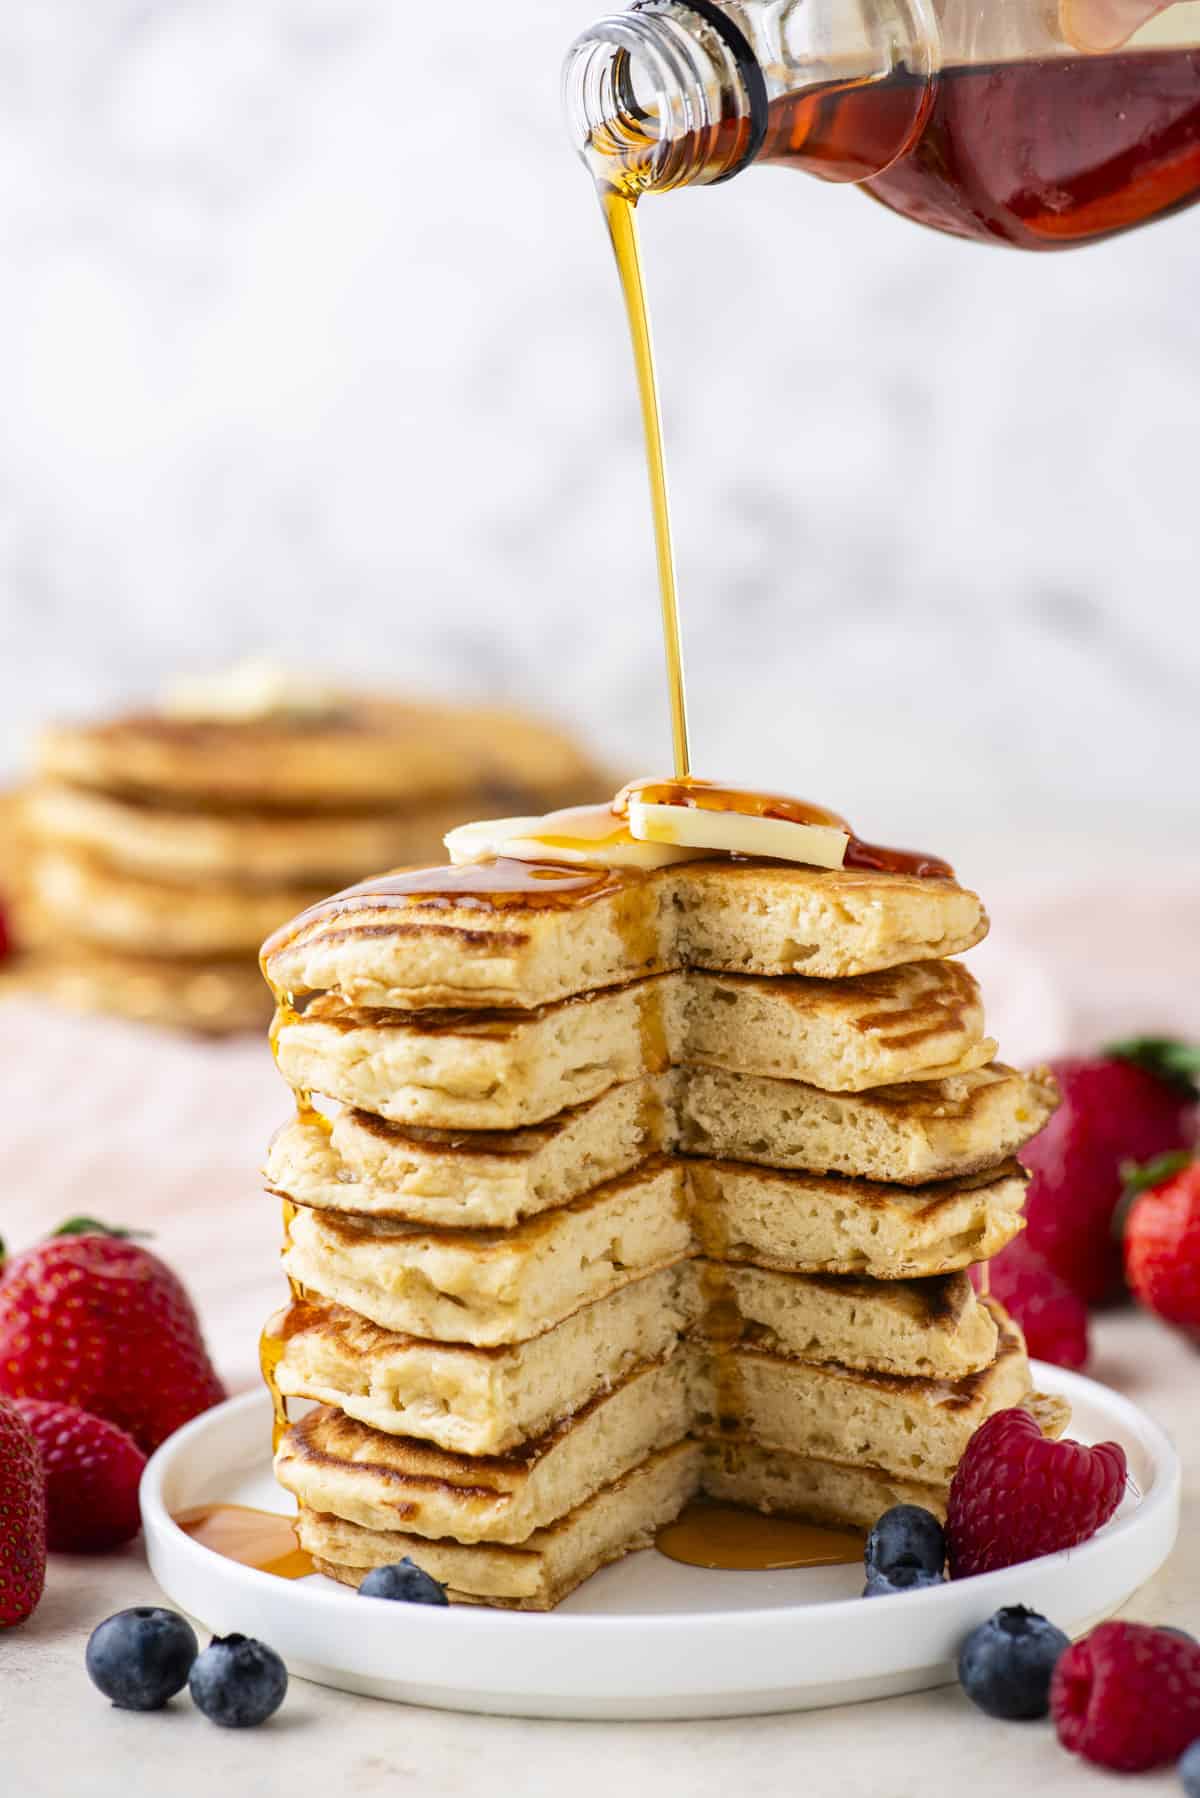 a tall stack of pancakes with a triangular portion cut out of the entire stack, being drizzled with syrup, topped with a slice of butter and surrounded by fresh berries on a white plate